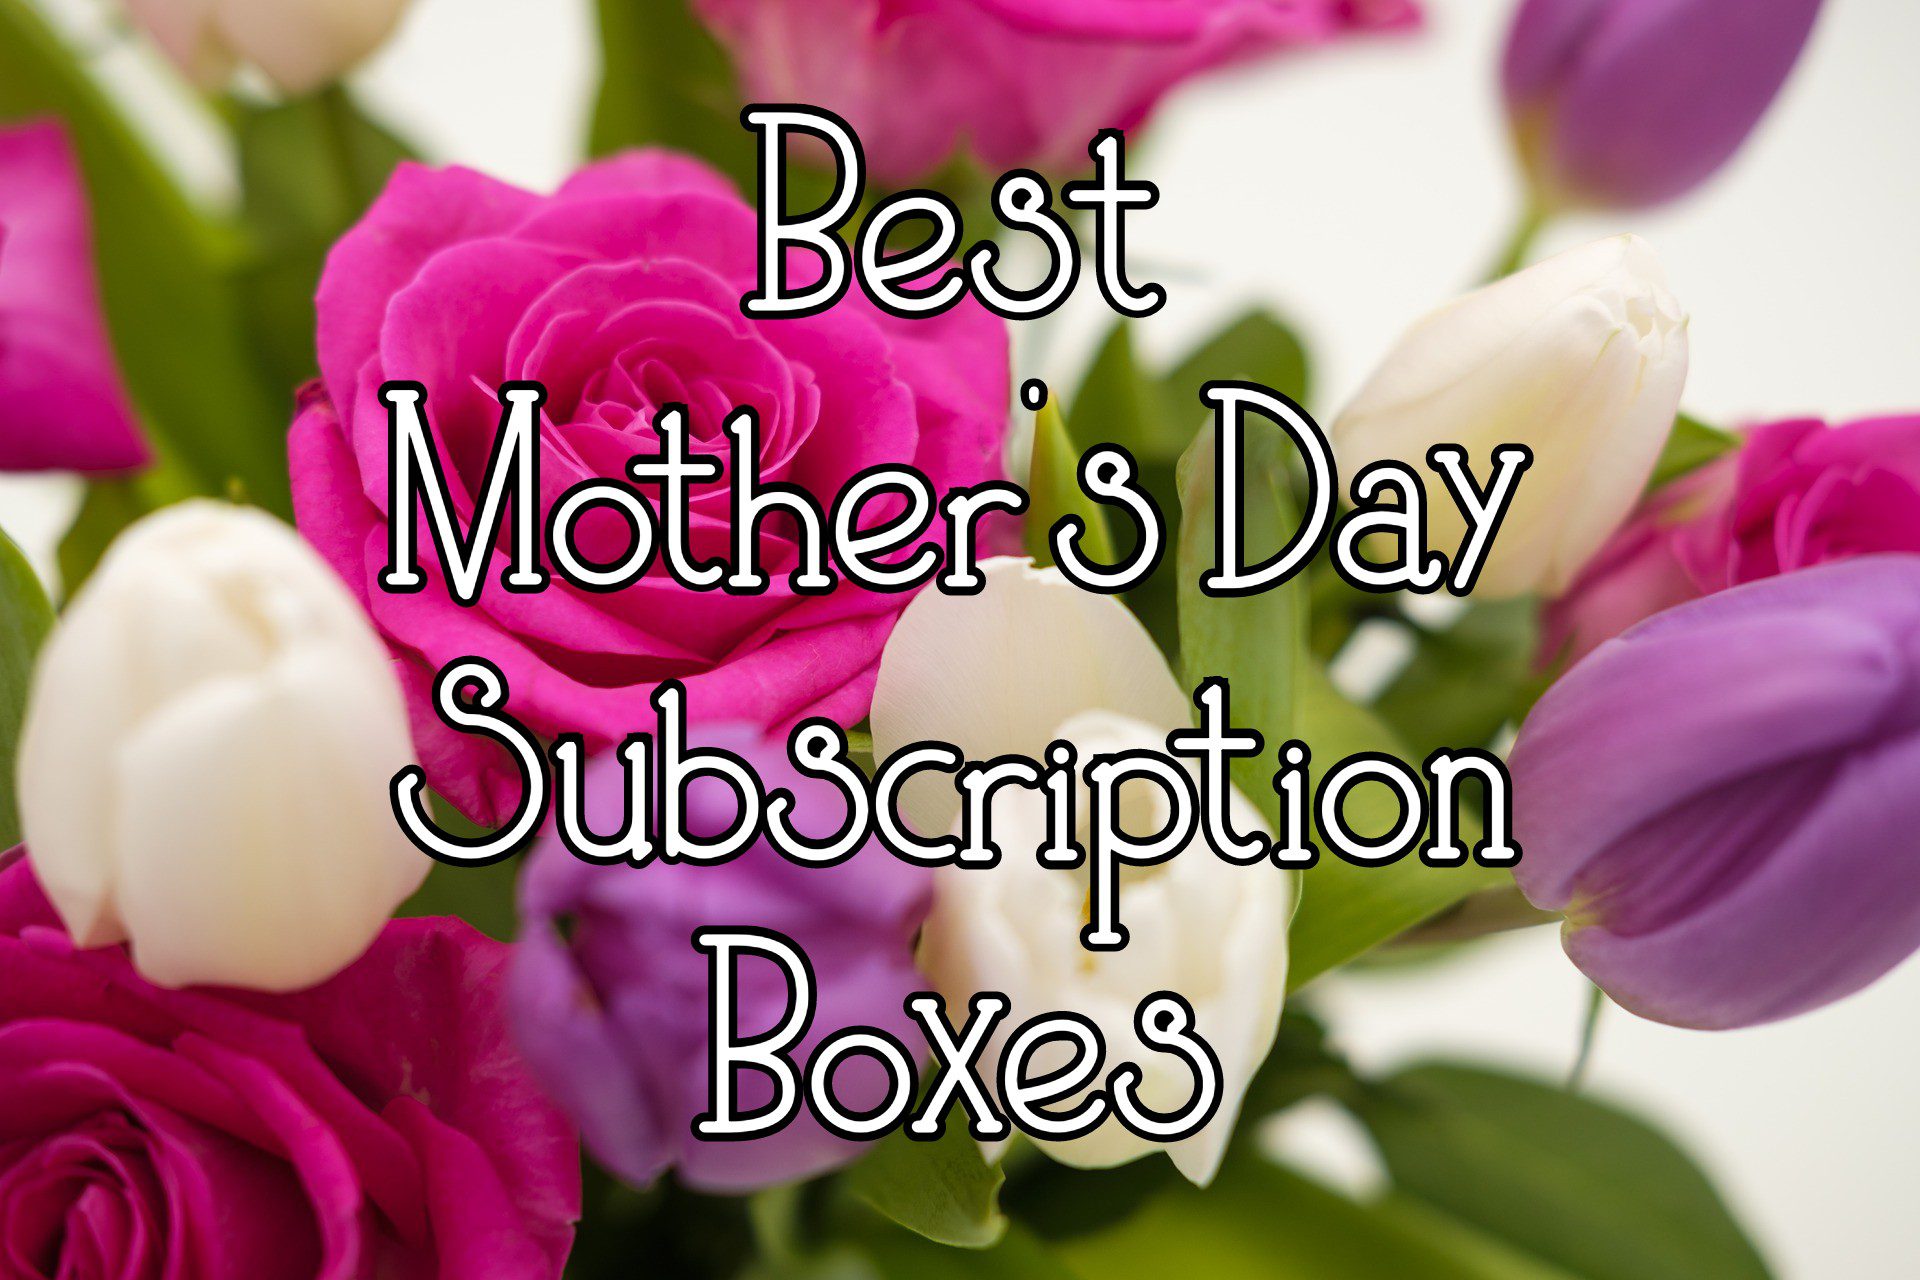 Best Mother’s Day Subscription Boxes